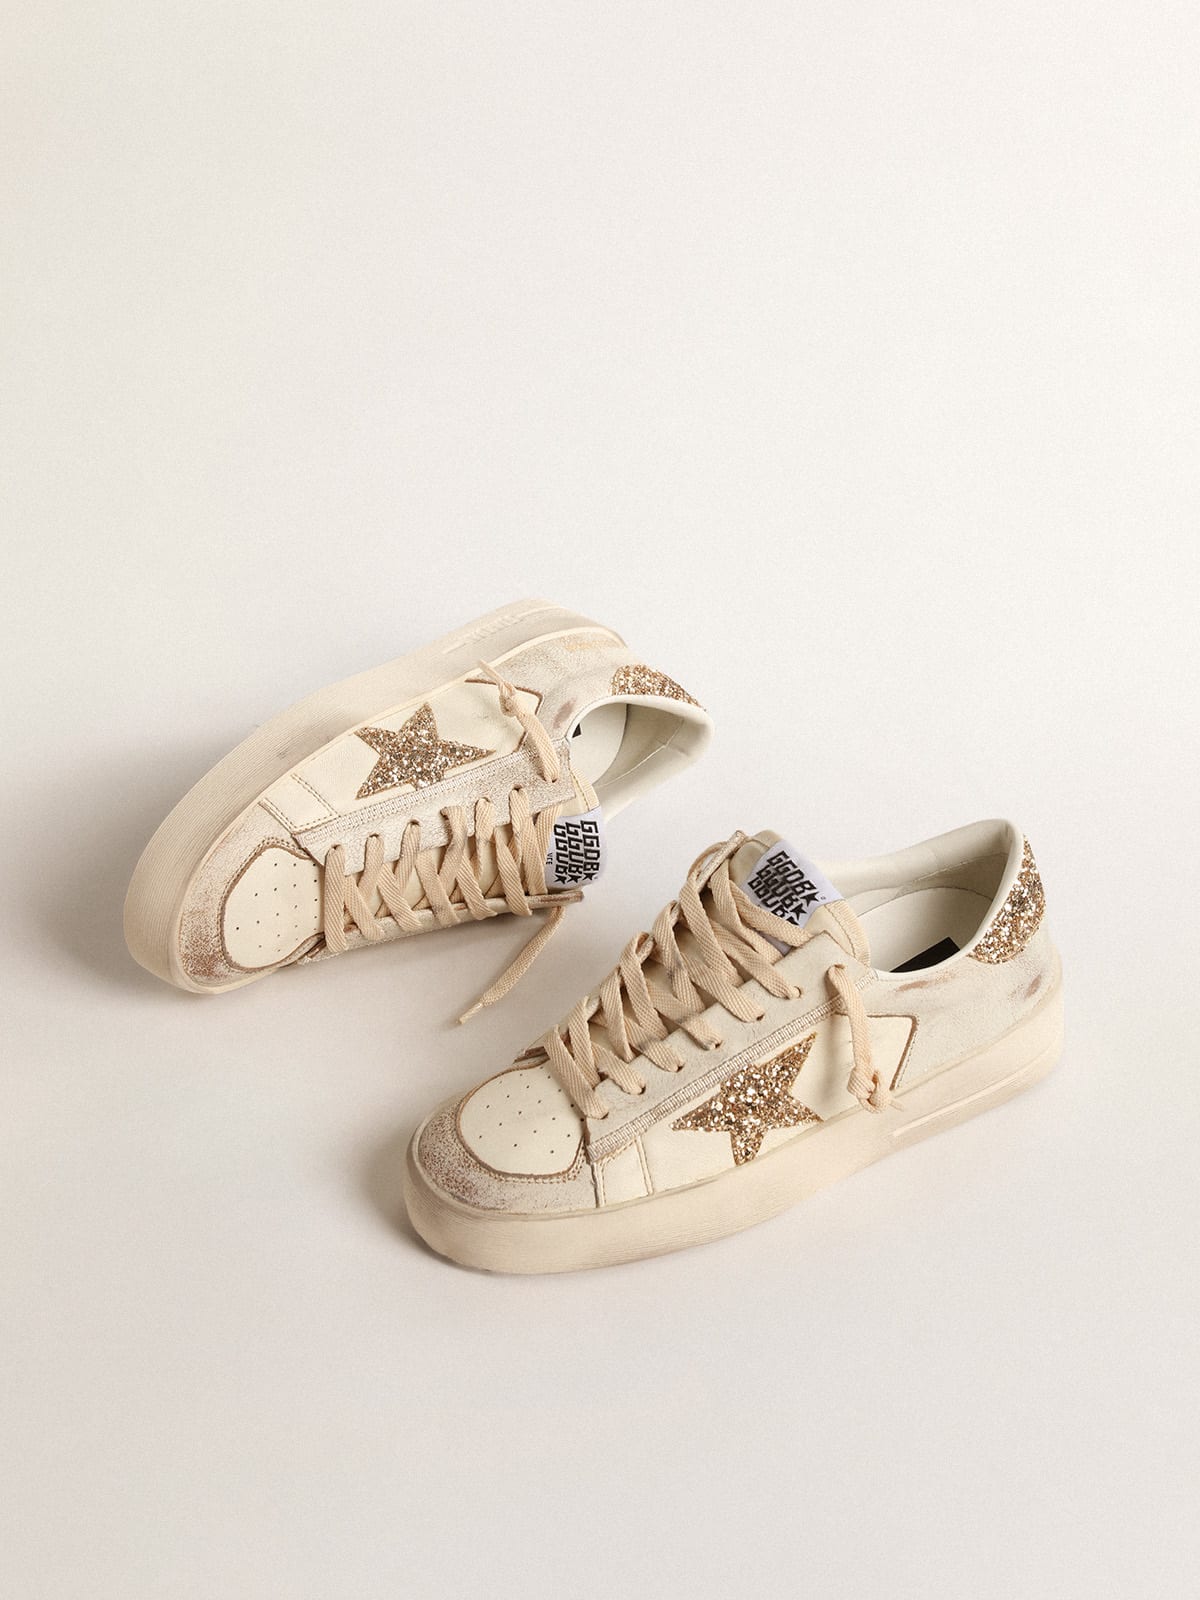 Golden Goose - Stardan in ecru nappa leather with gold glitter star and heel tab in 